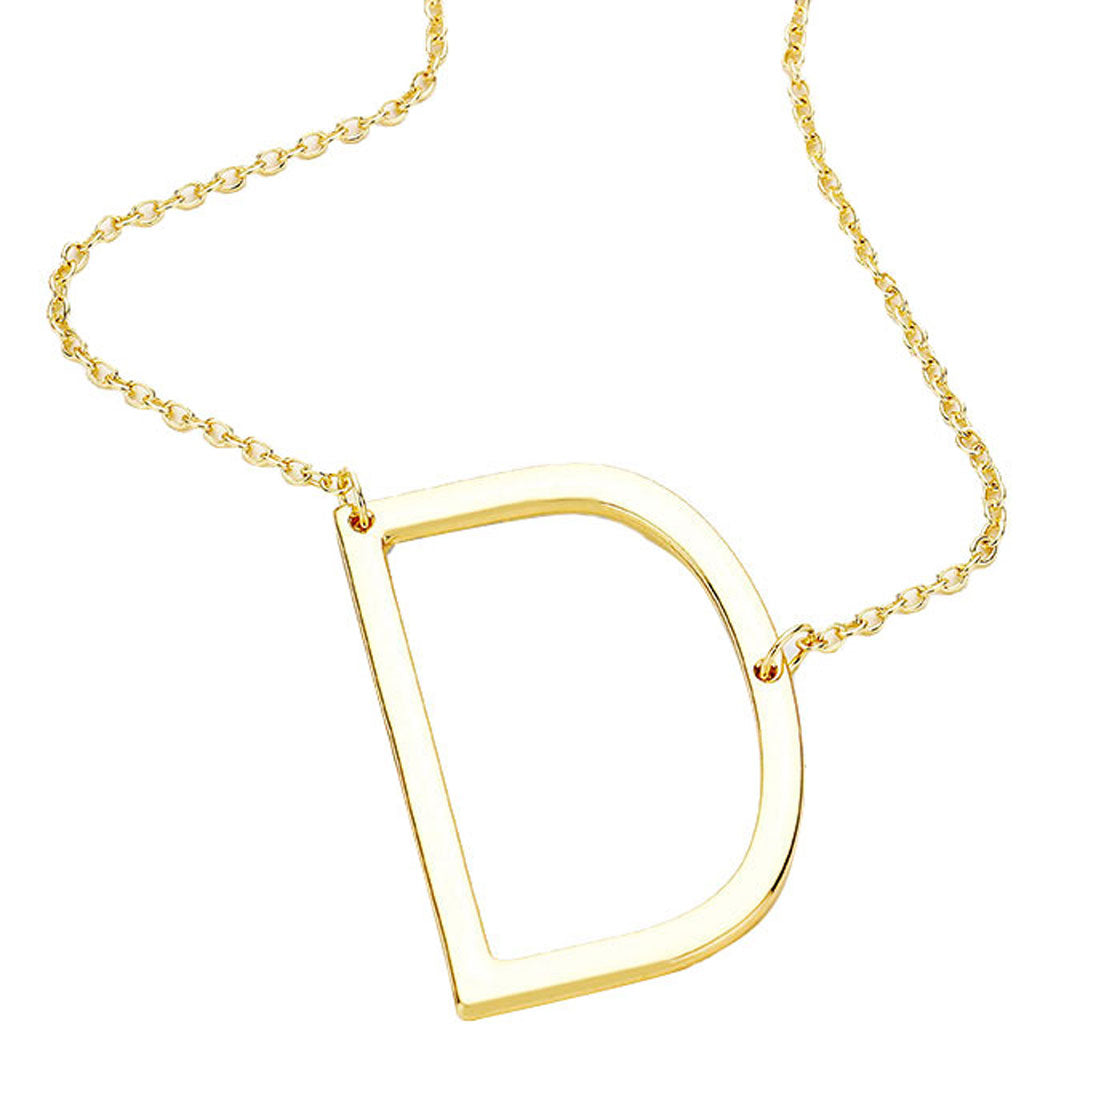 Gold D Monogram Metal Pendant Necklace. Beautifully crafted design adds a gorgeous glow to any outfit. Jewelry that fits your lifestyle! Perfect Birthday Gift, Anniversary Gift, Mother's Day Gift, Anniversary Gift, Graduation Gift, Prom Jewelry, Just Because Gift, Thank you Gift.